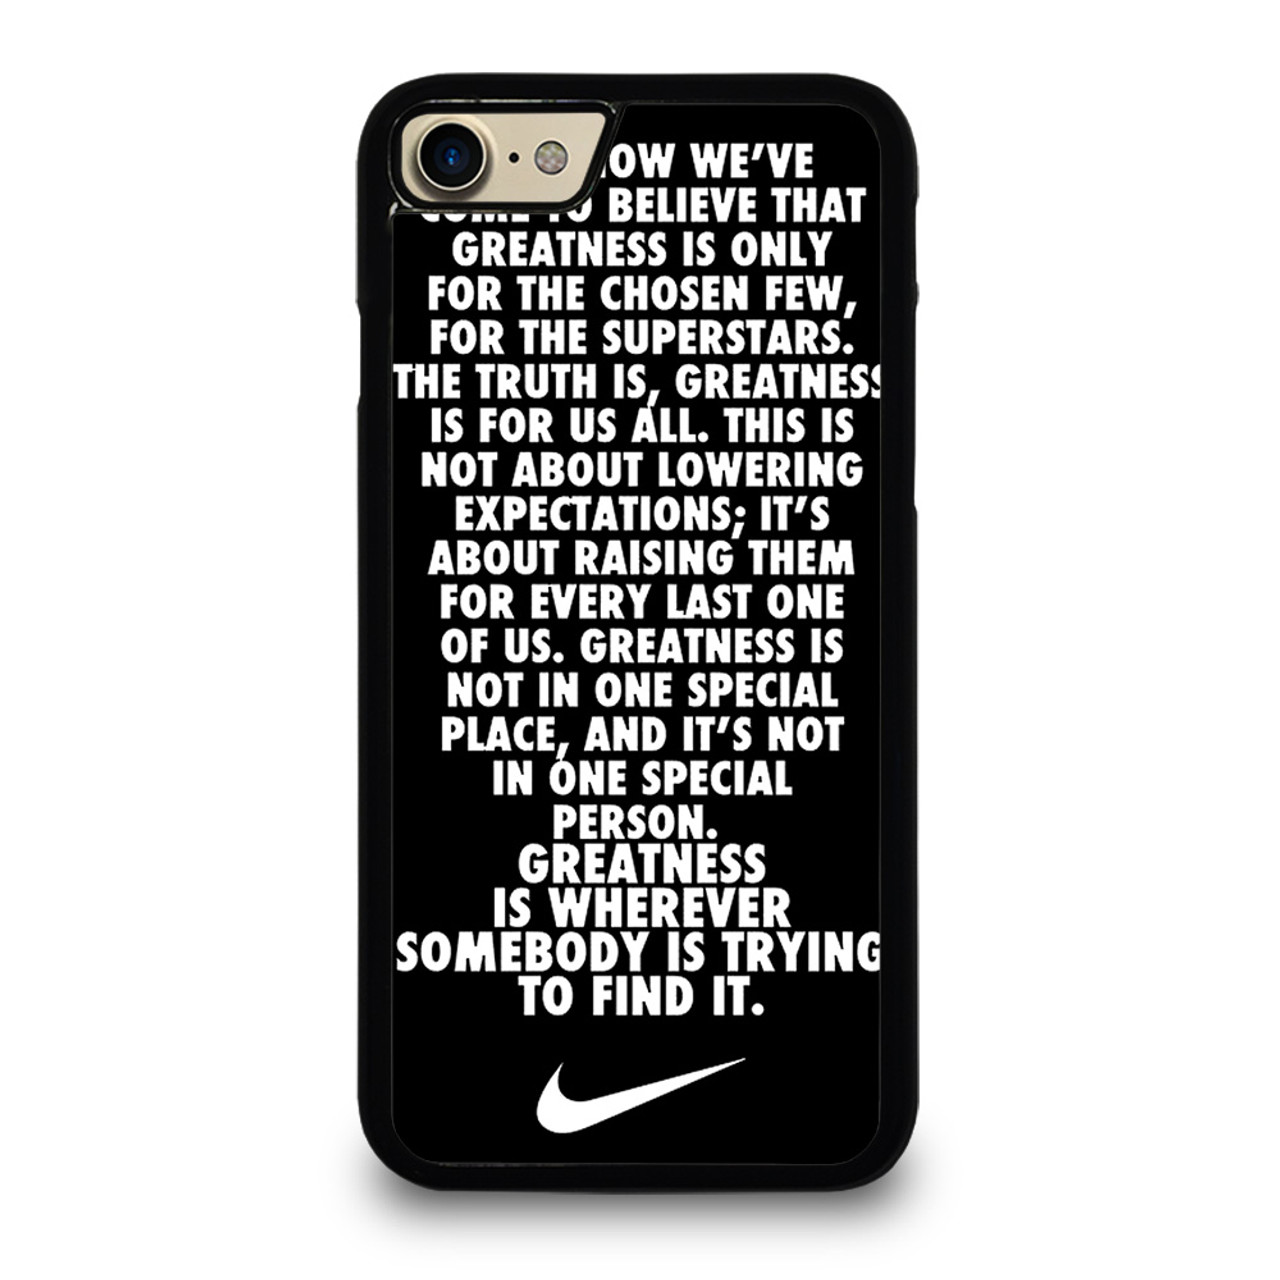 NIKE QUOTE iPhone 7 Case Cover